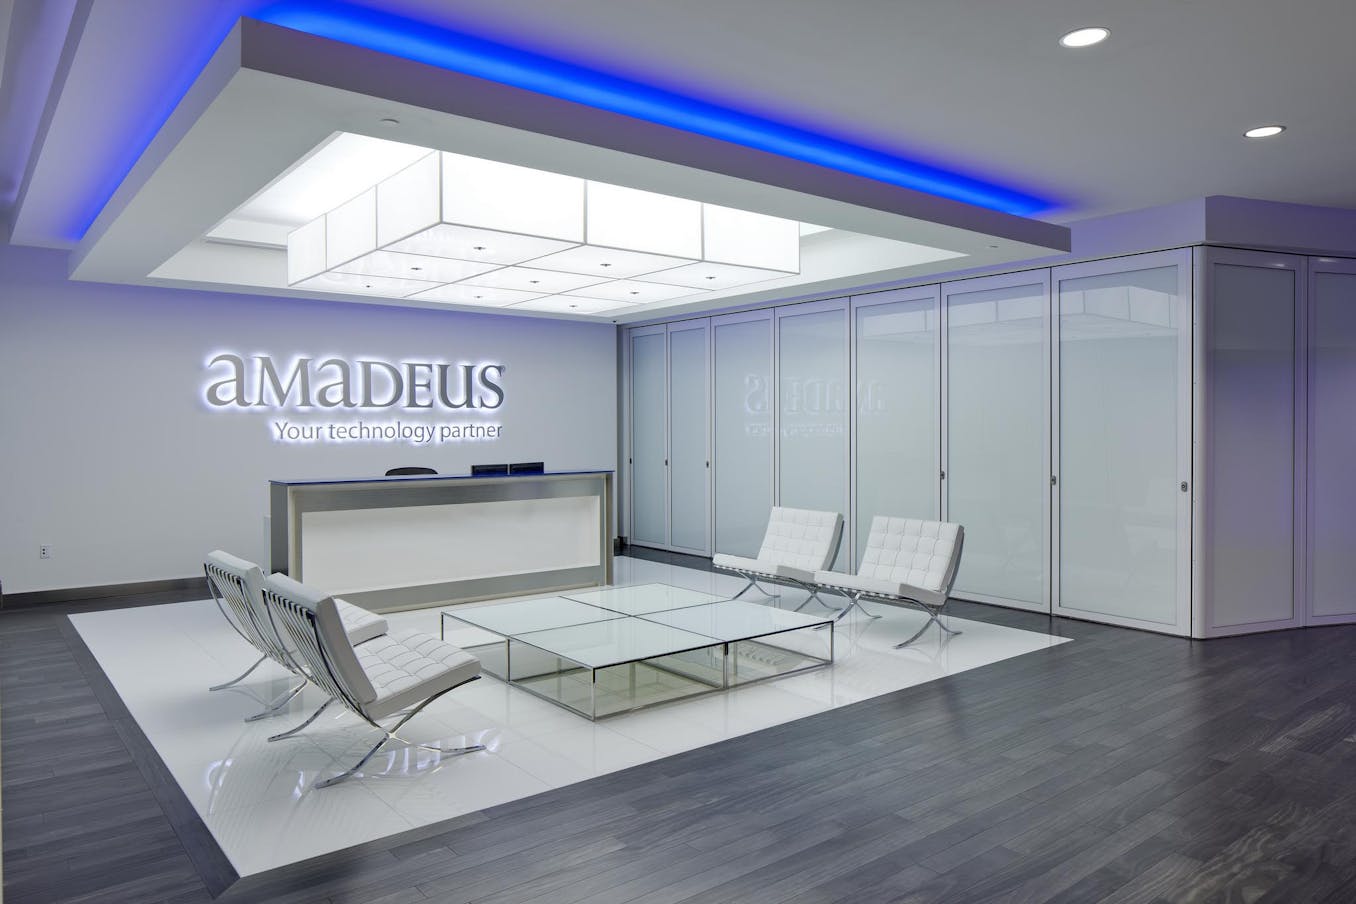 Commercial office space at Amadeus in Florida - closed frosted sliding glass walls